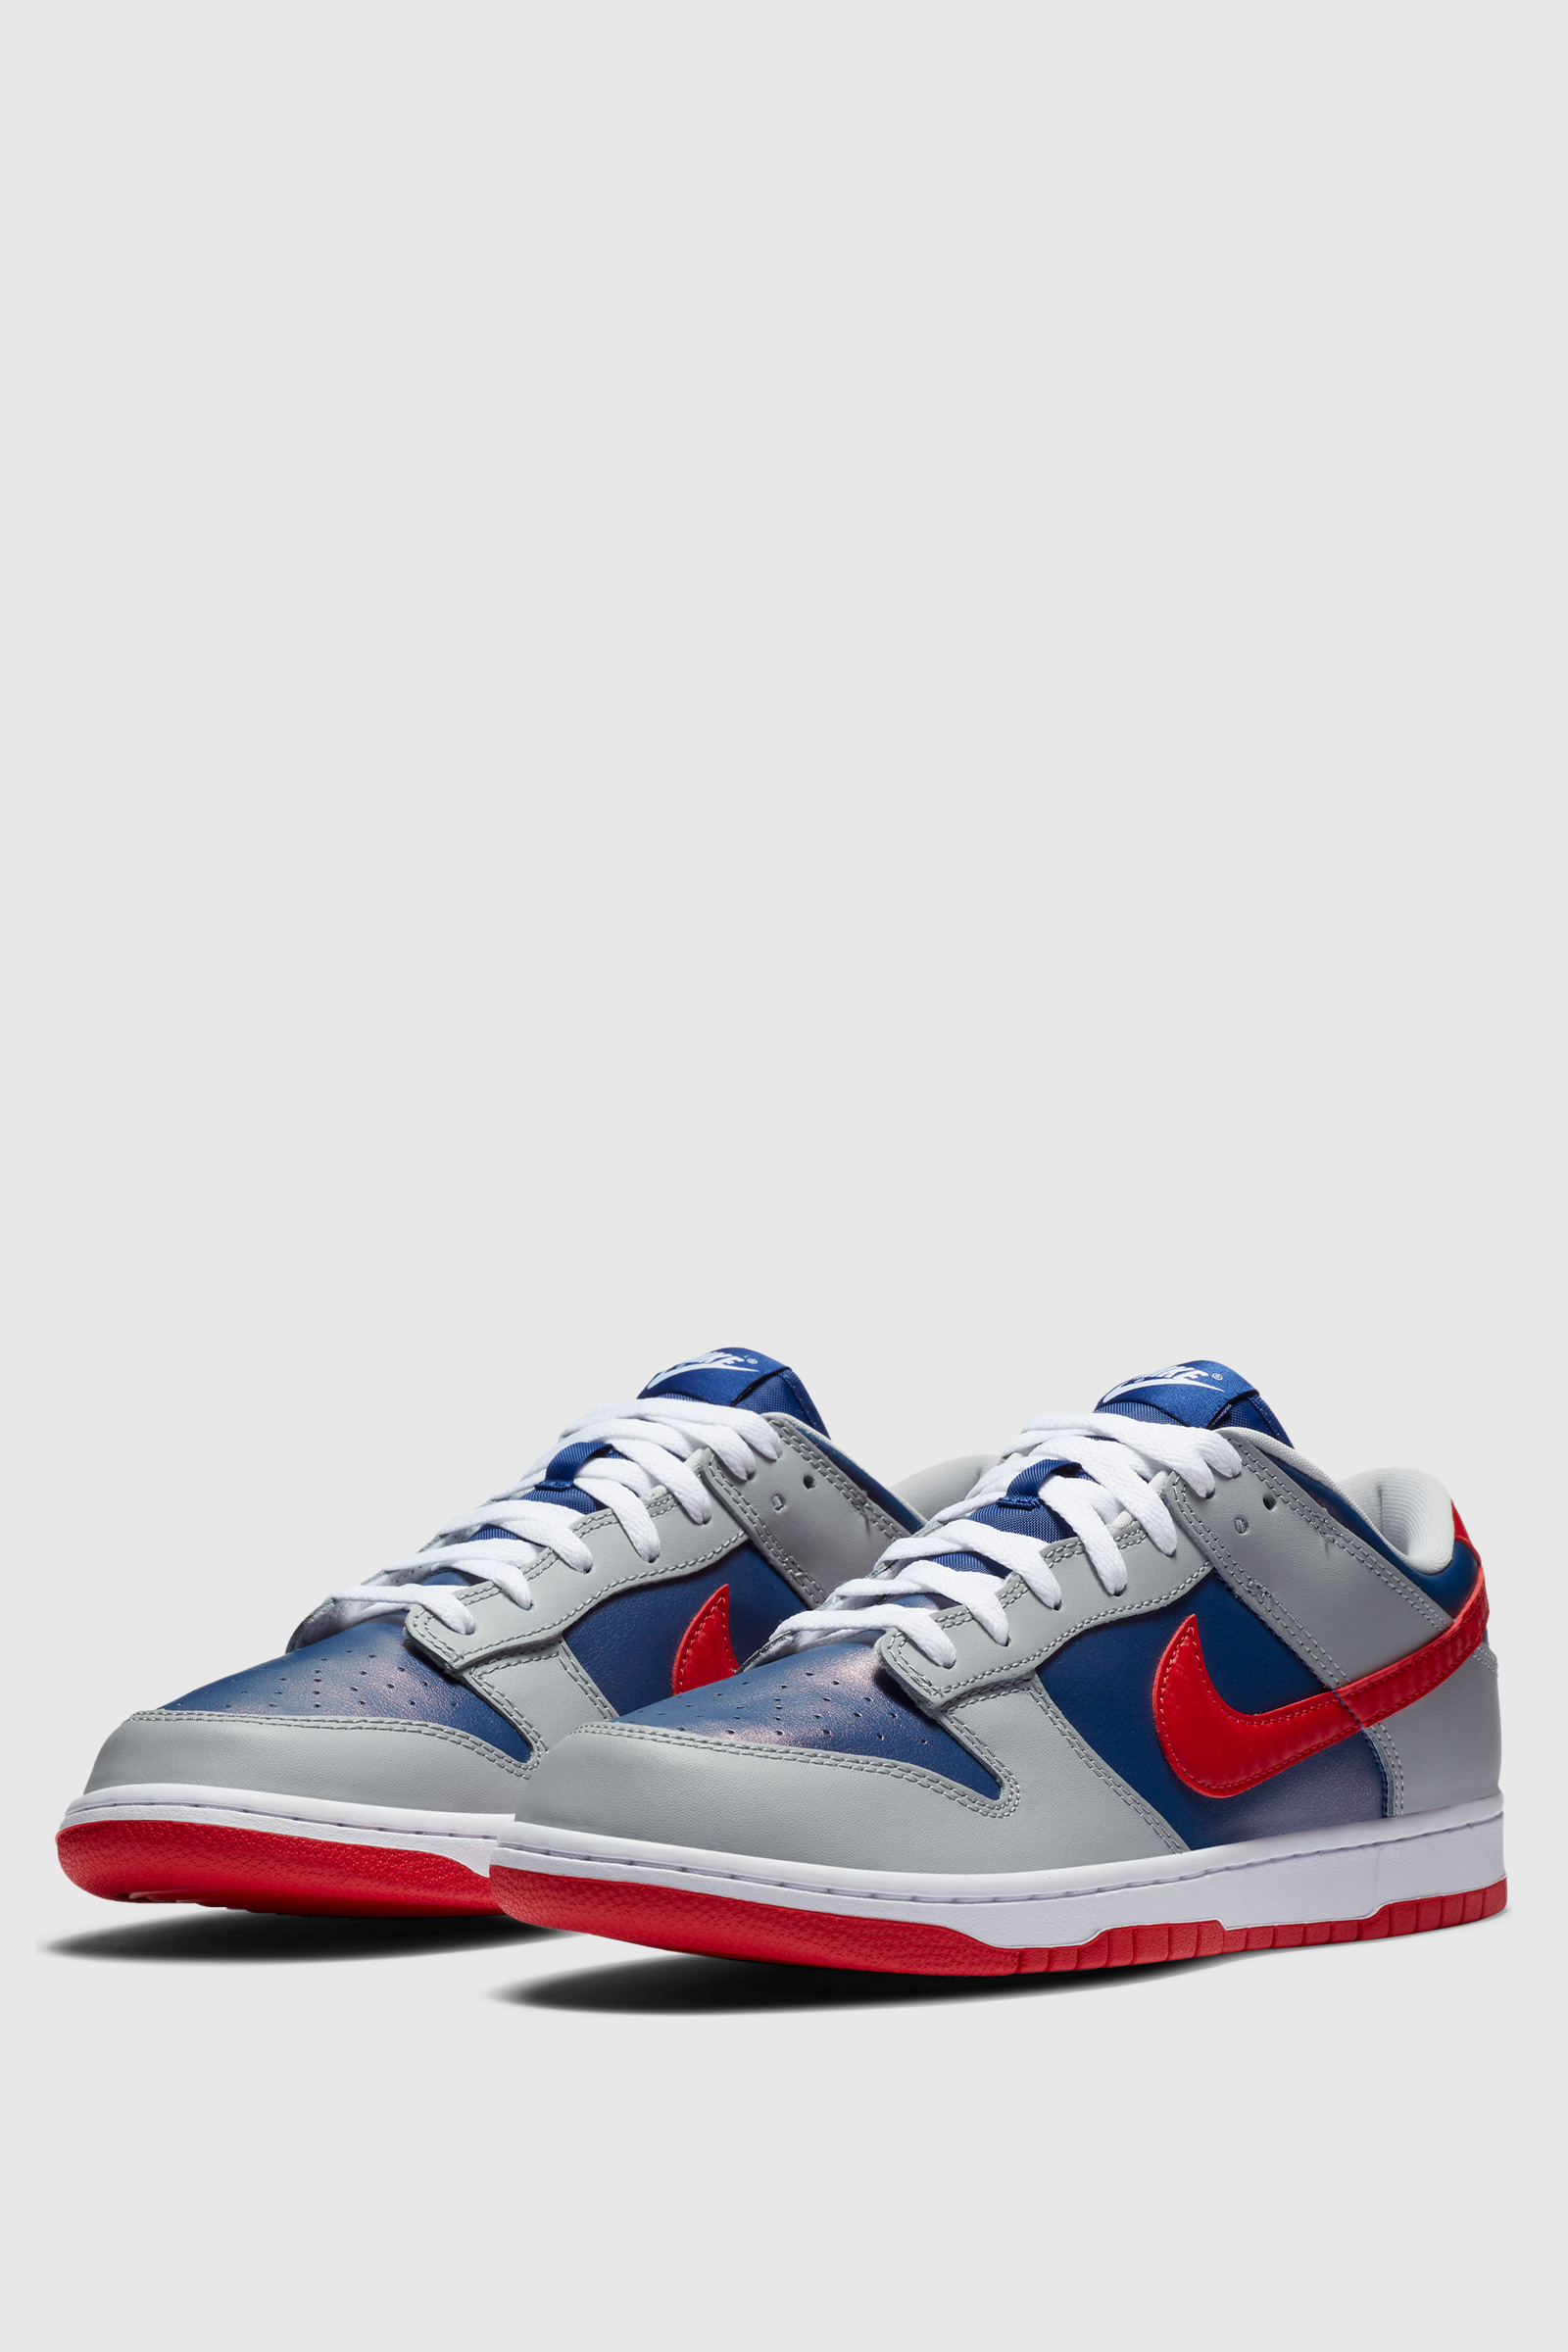 nike dunk was